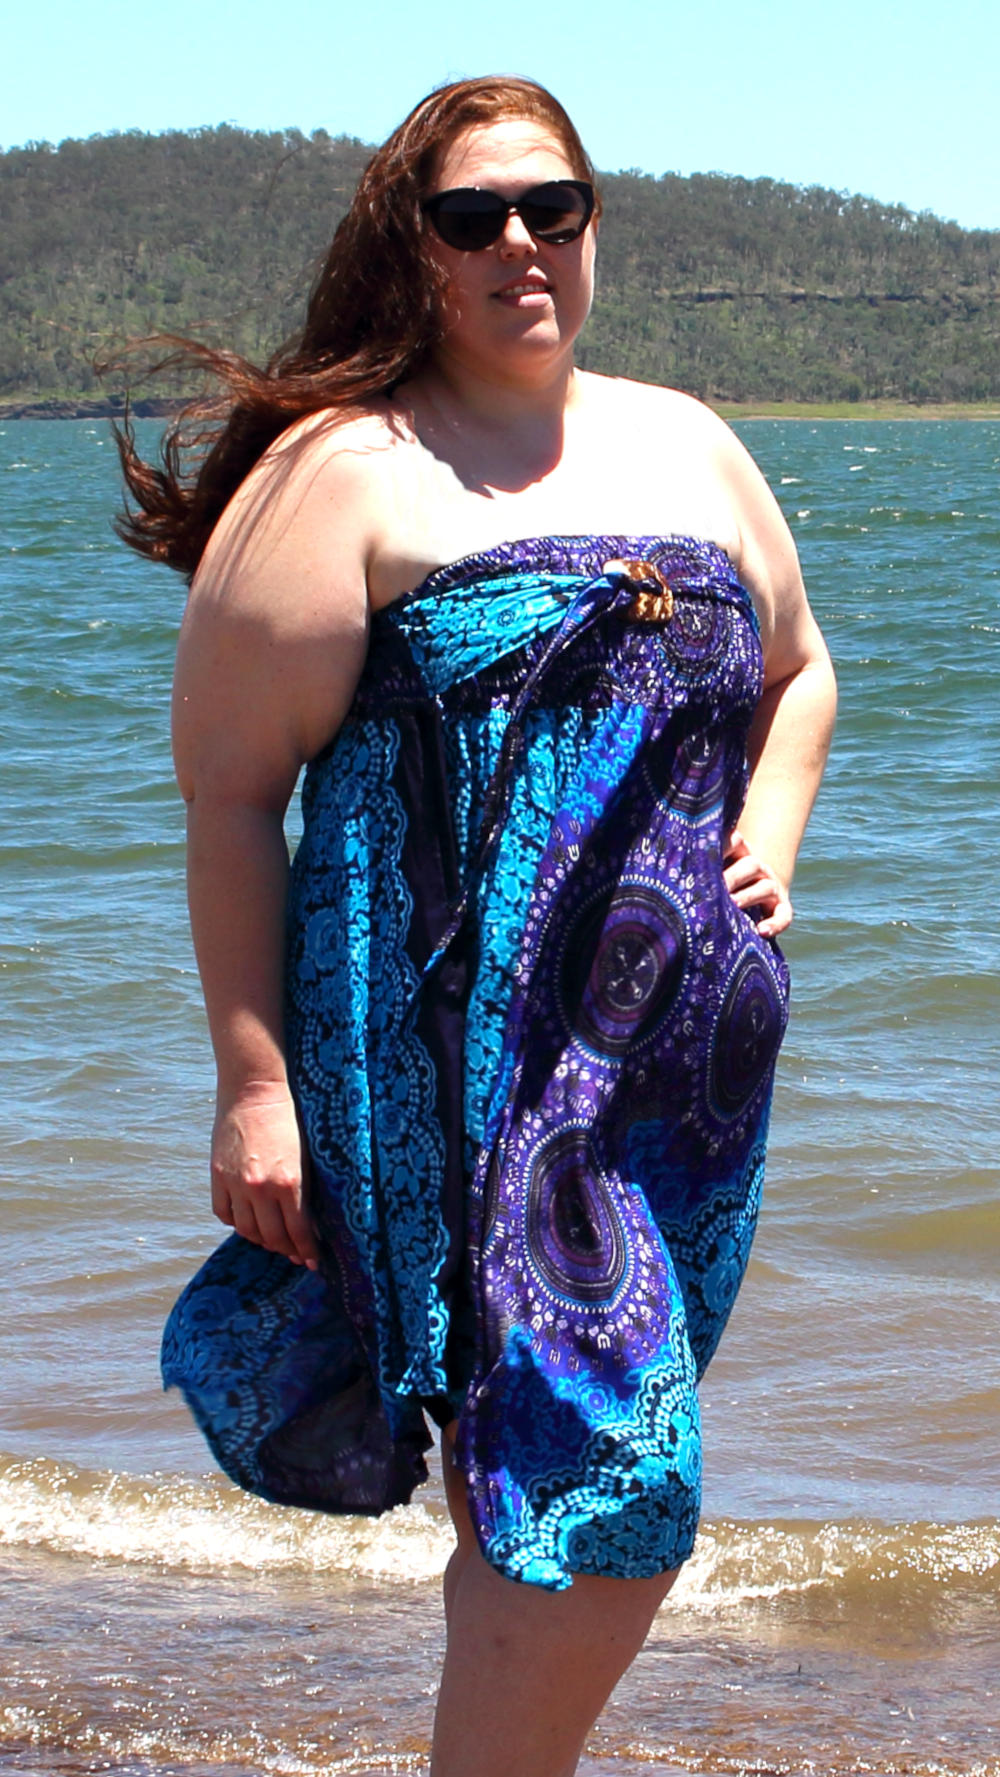 What should I wear for a plus size beach vacation?